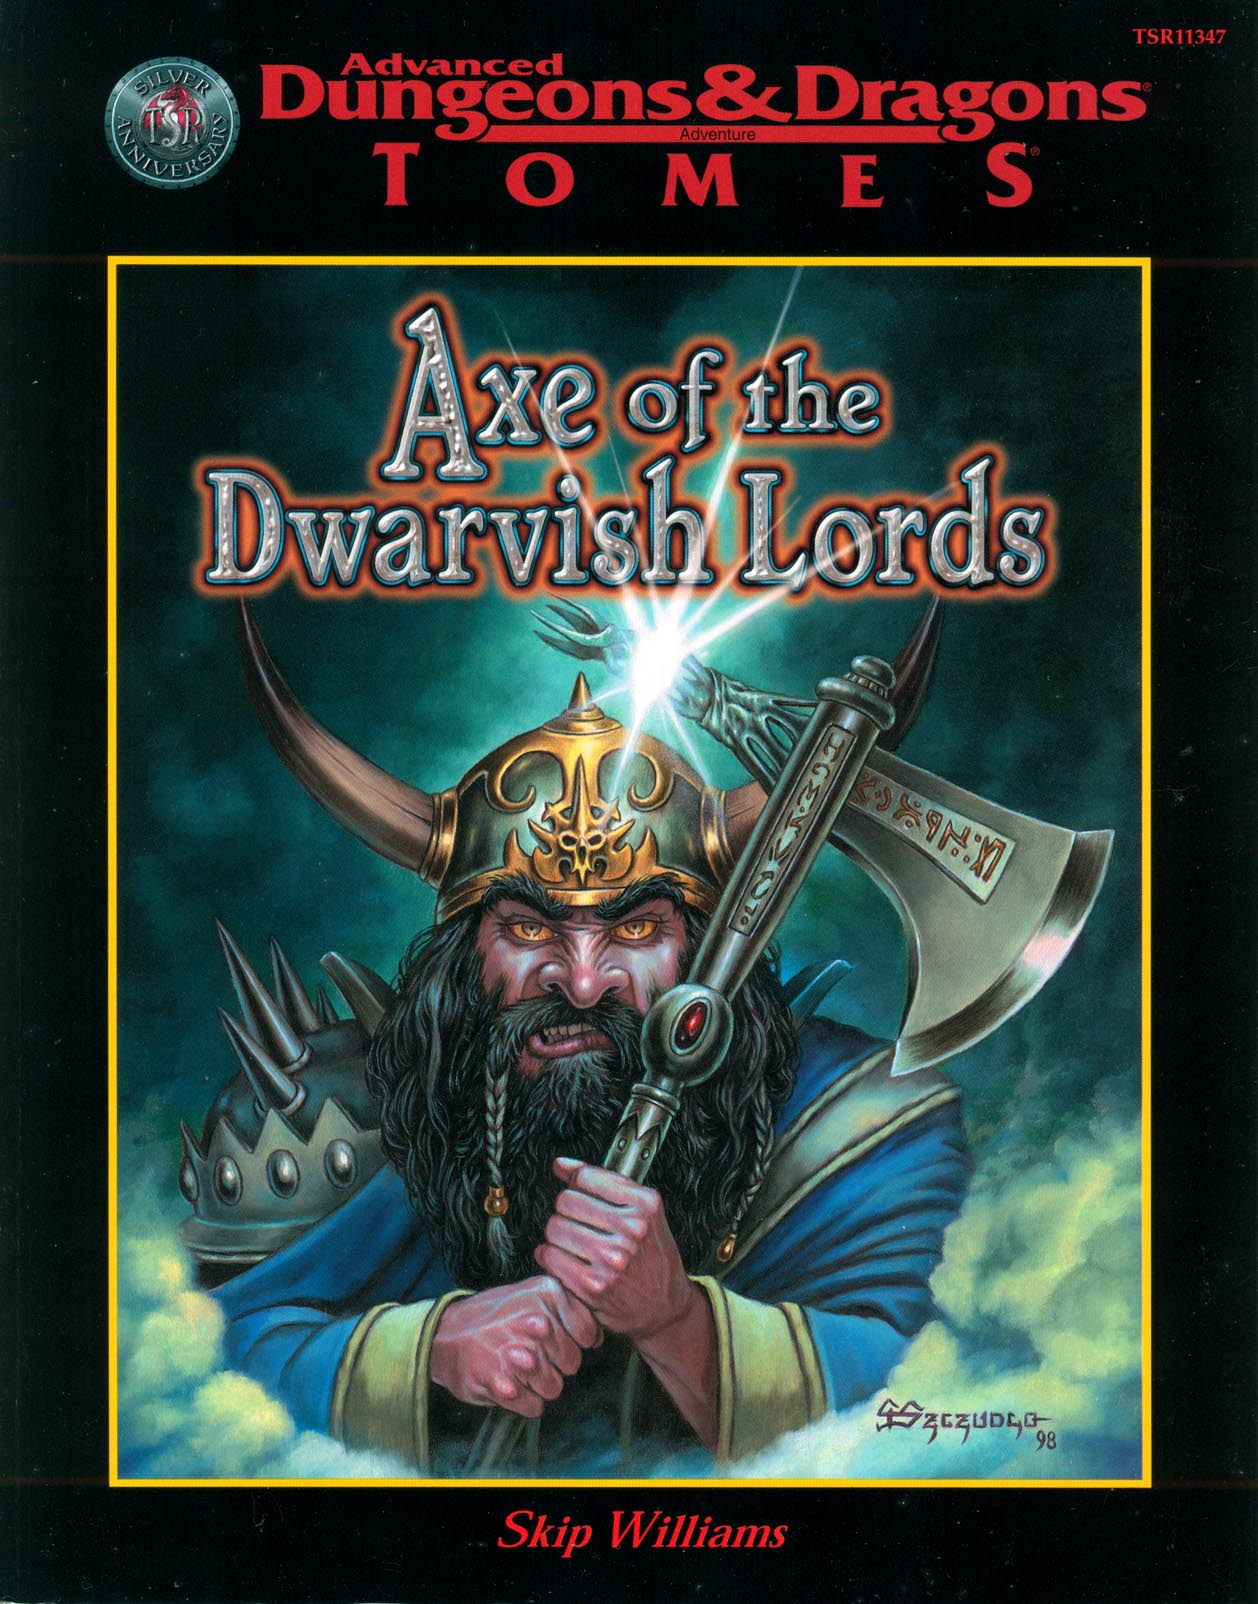 Axe of the Dwarvish LordsCover art